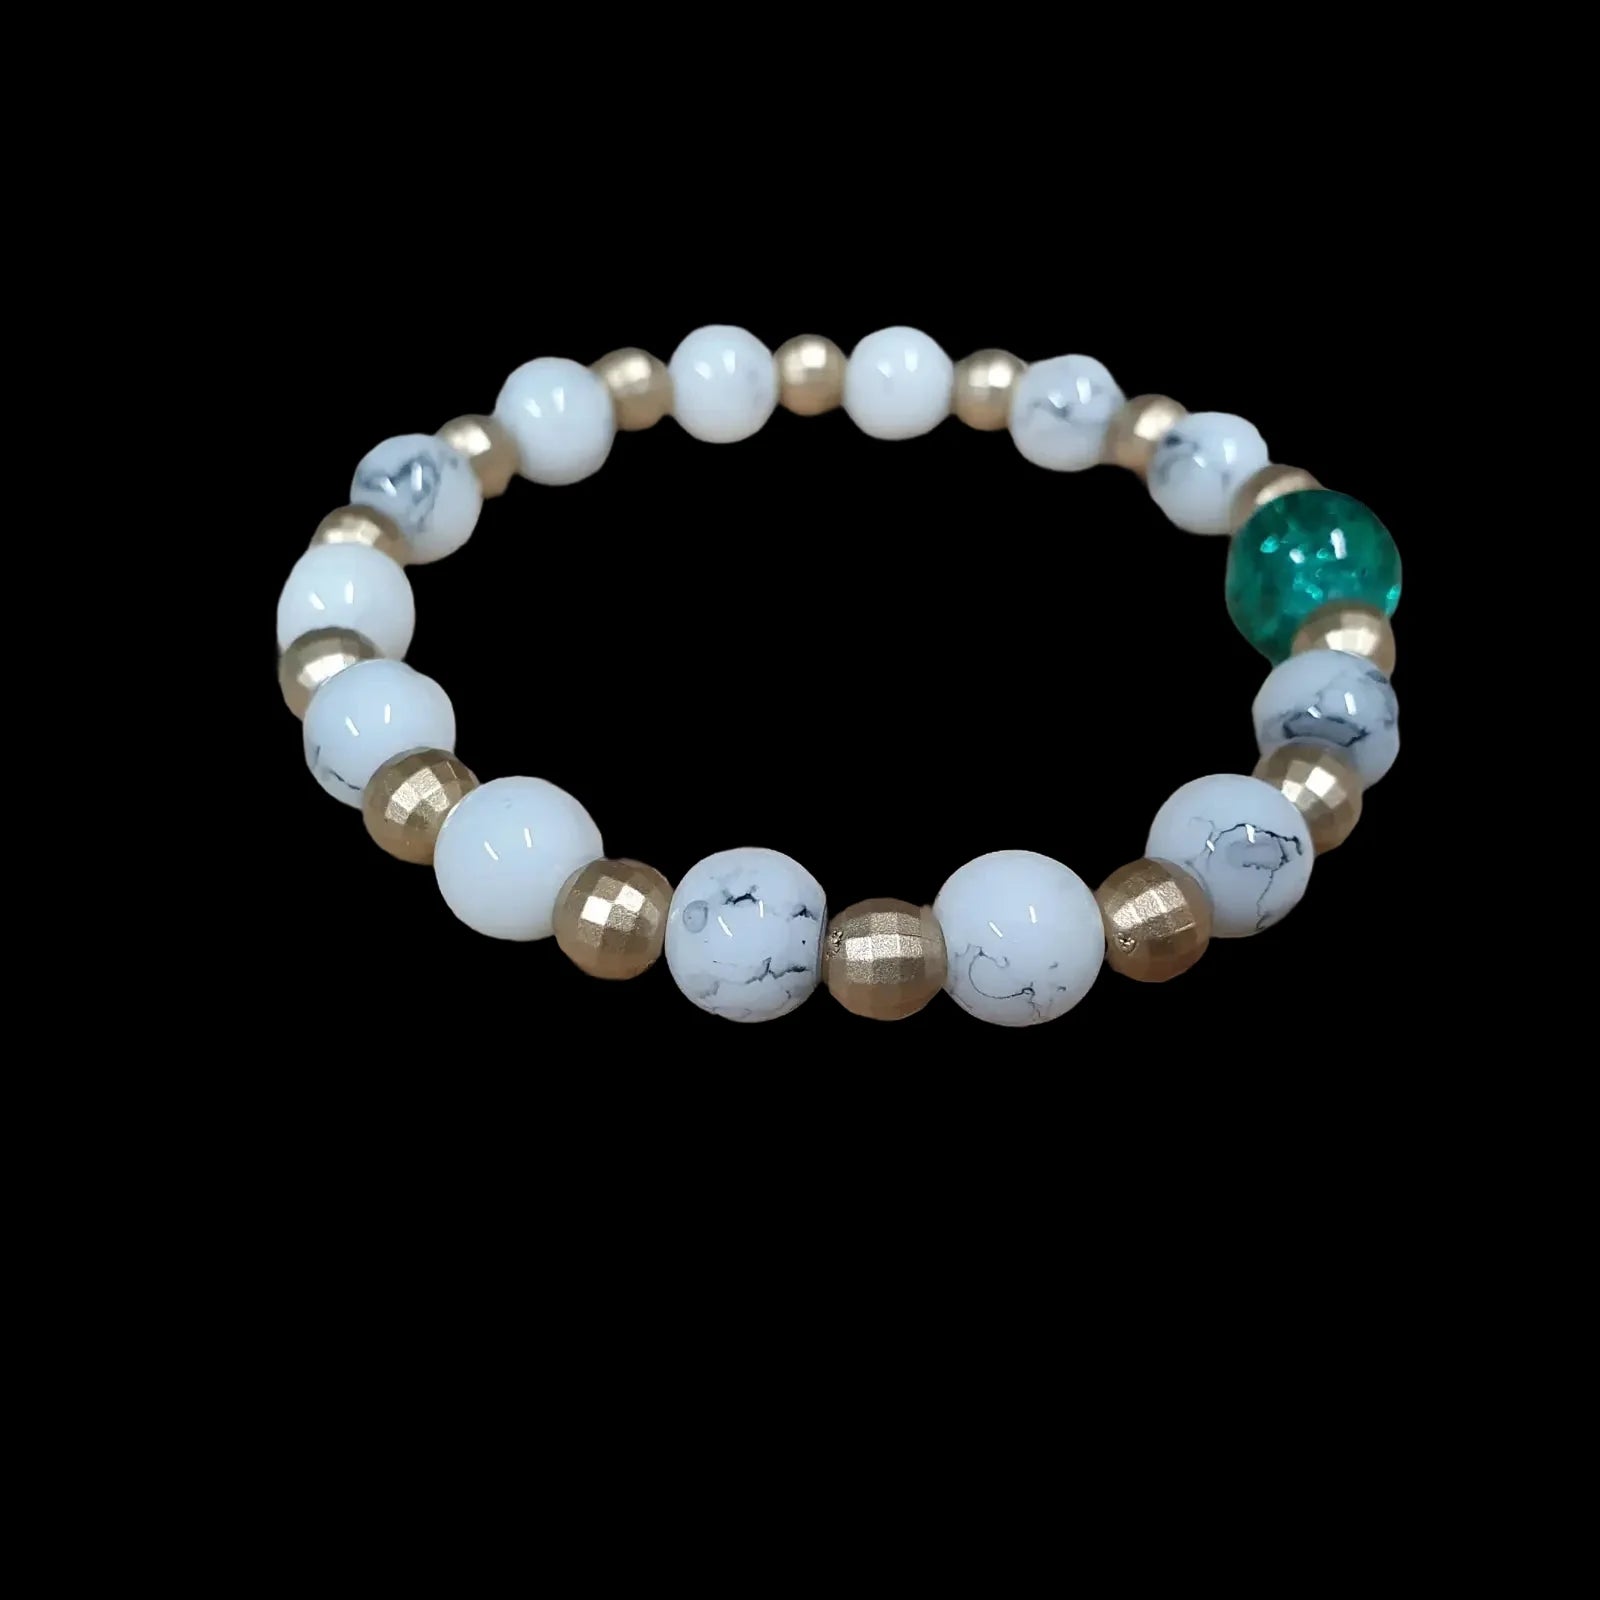 Unique Handmade Crafted Beaded Bracelet White Gold Gift